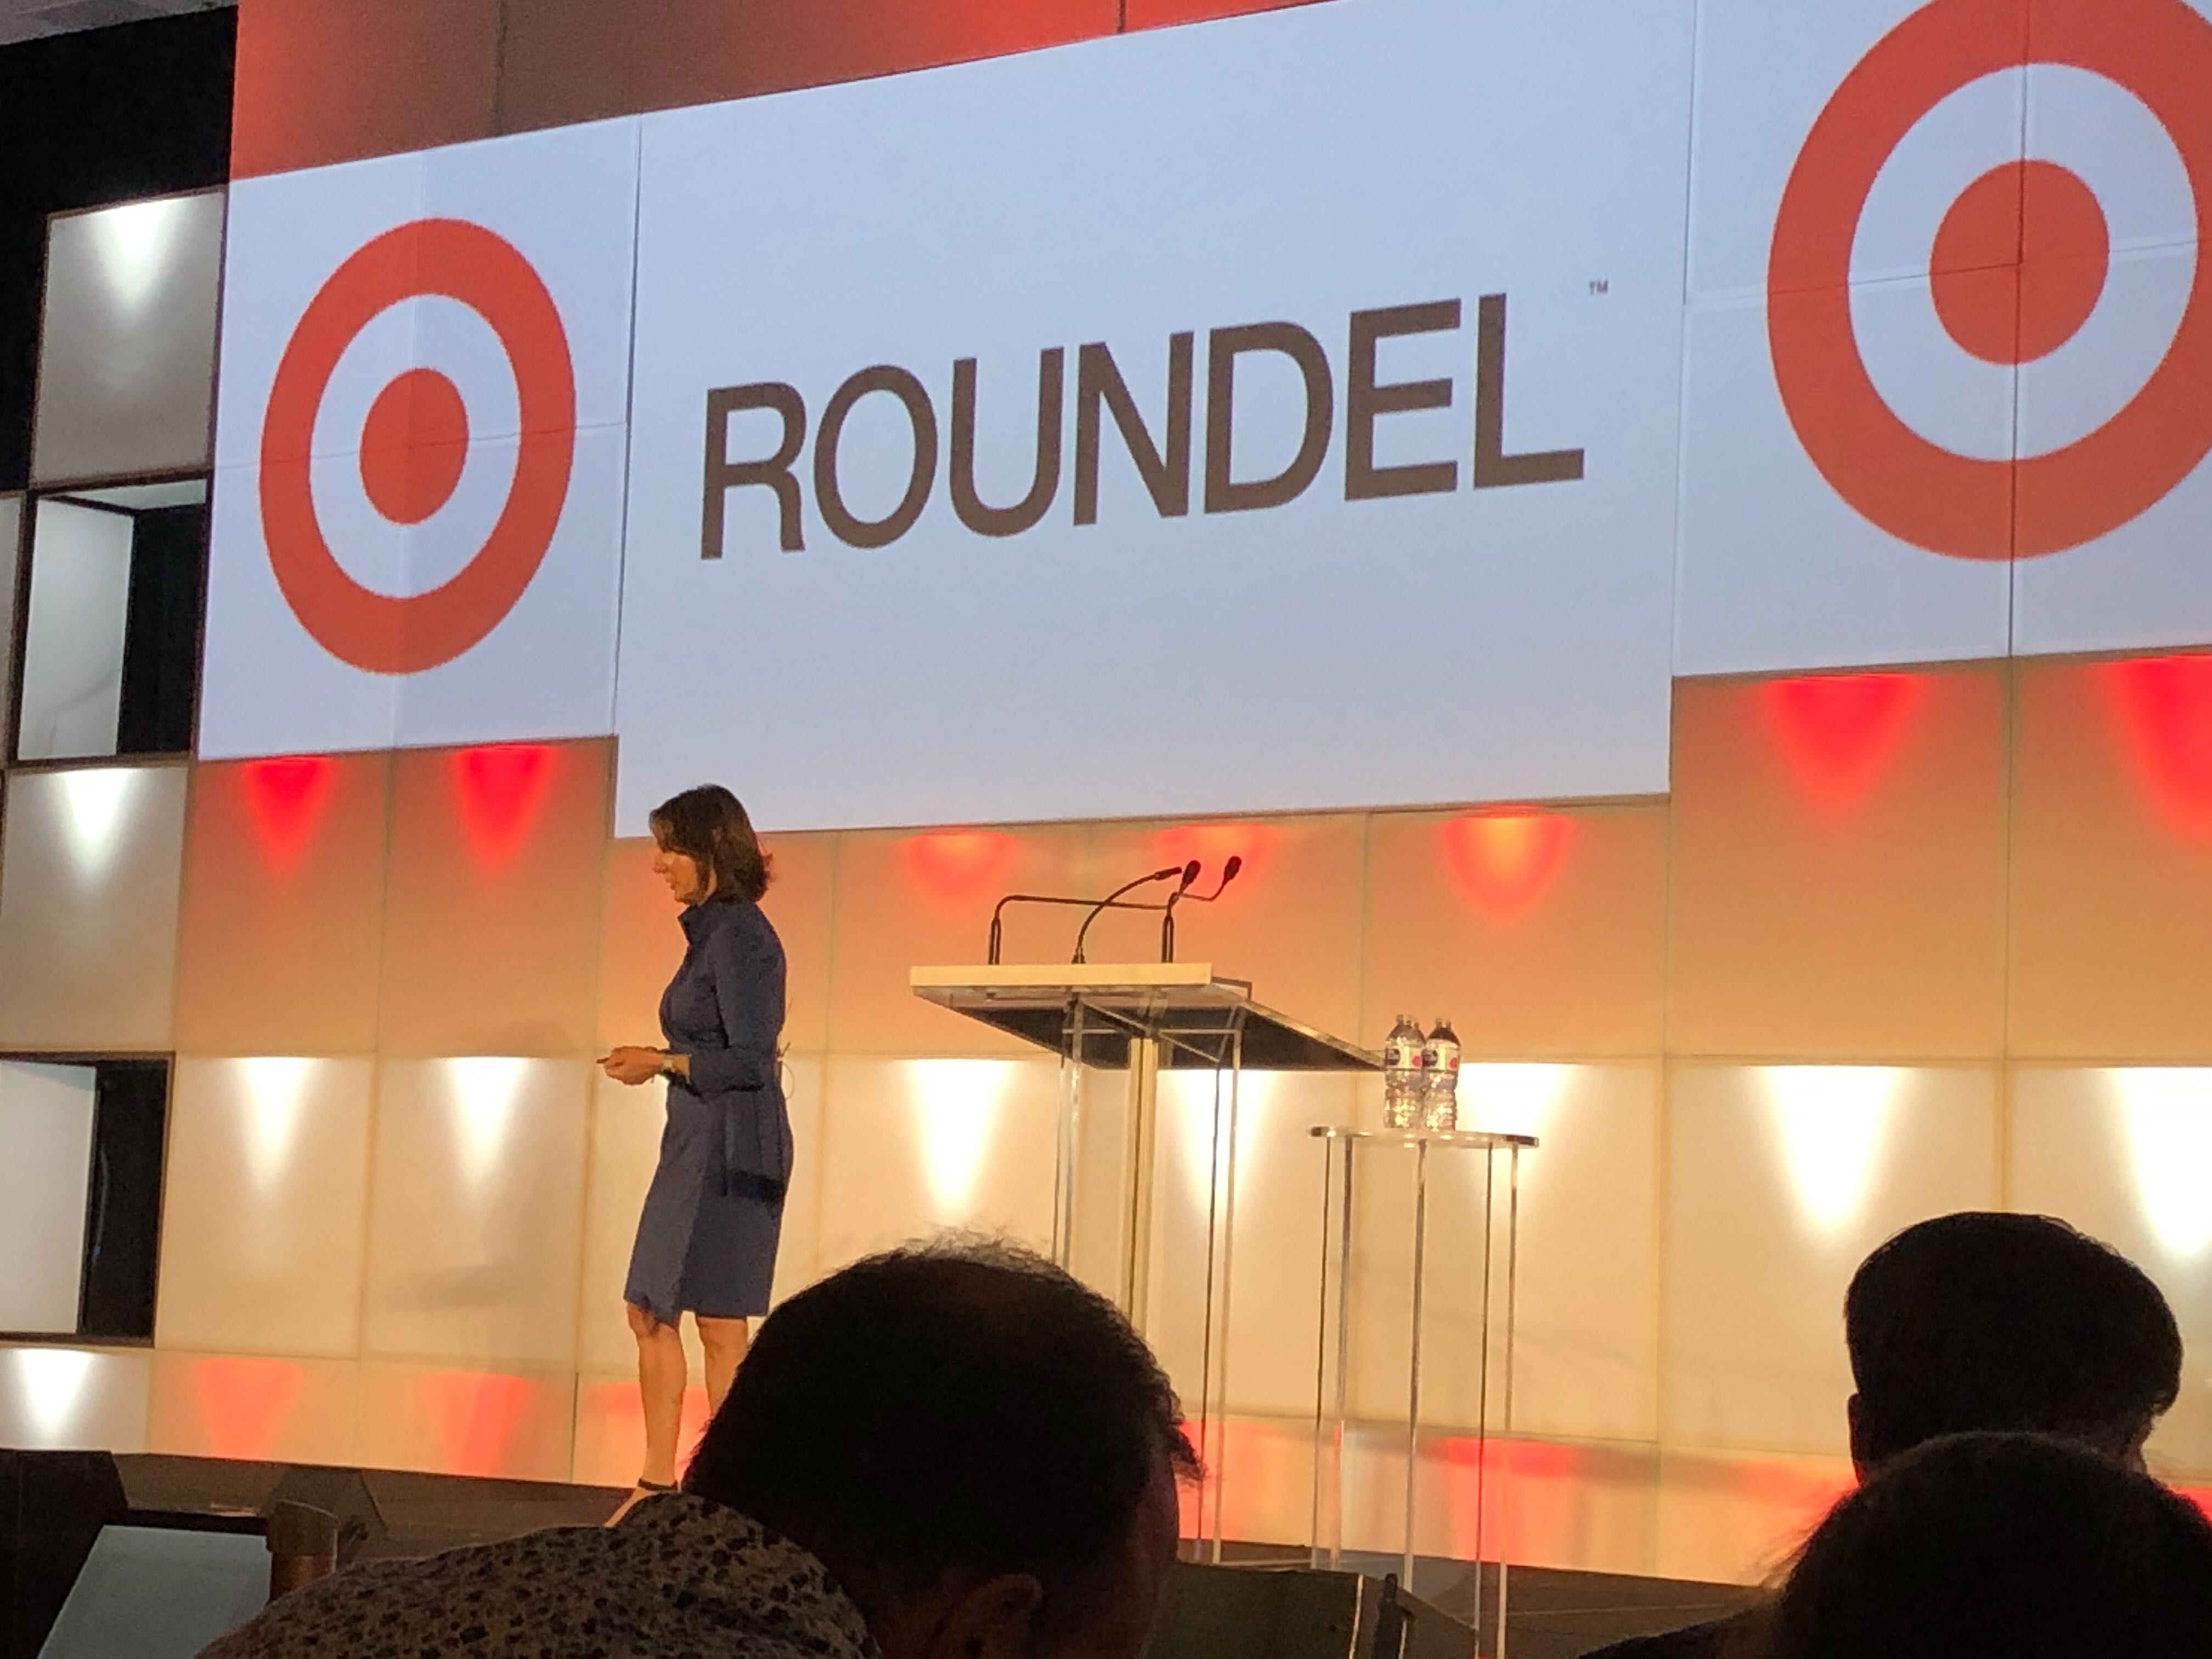 Target and Roundel Image from the ANA Conference.